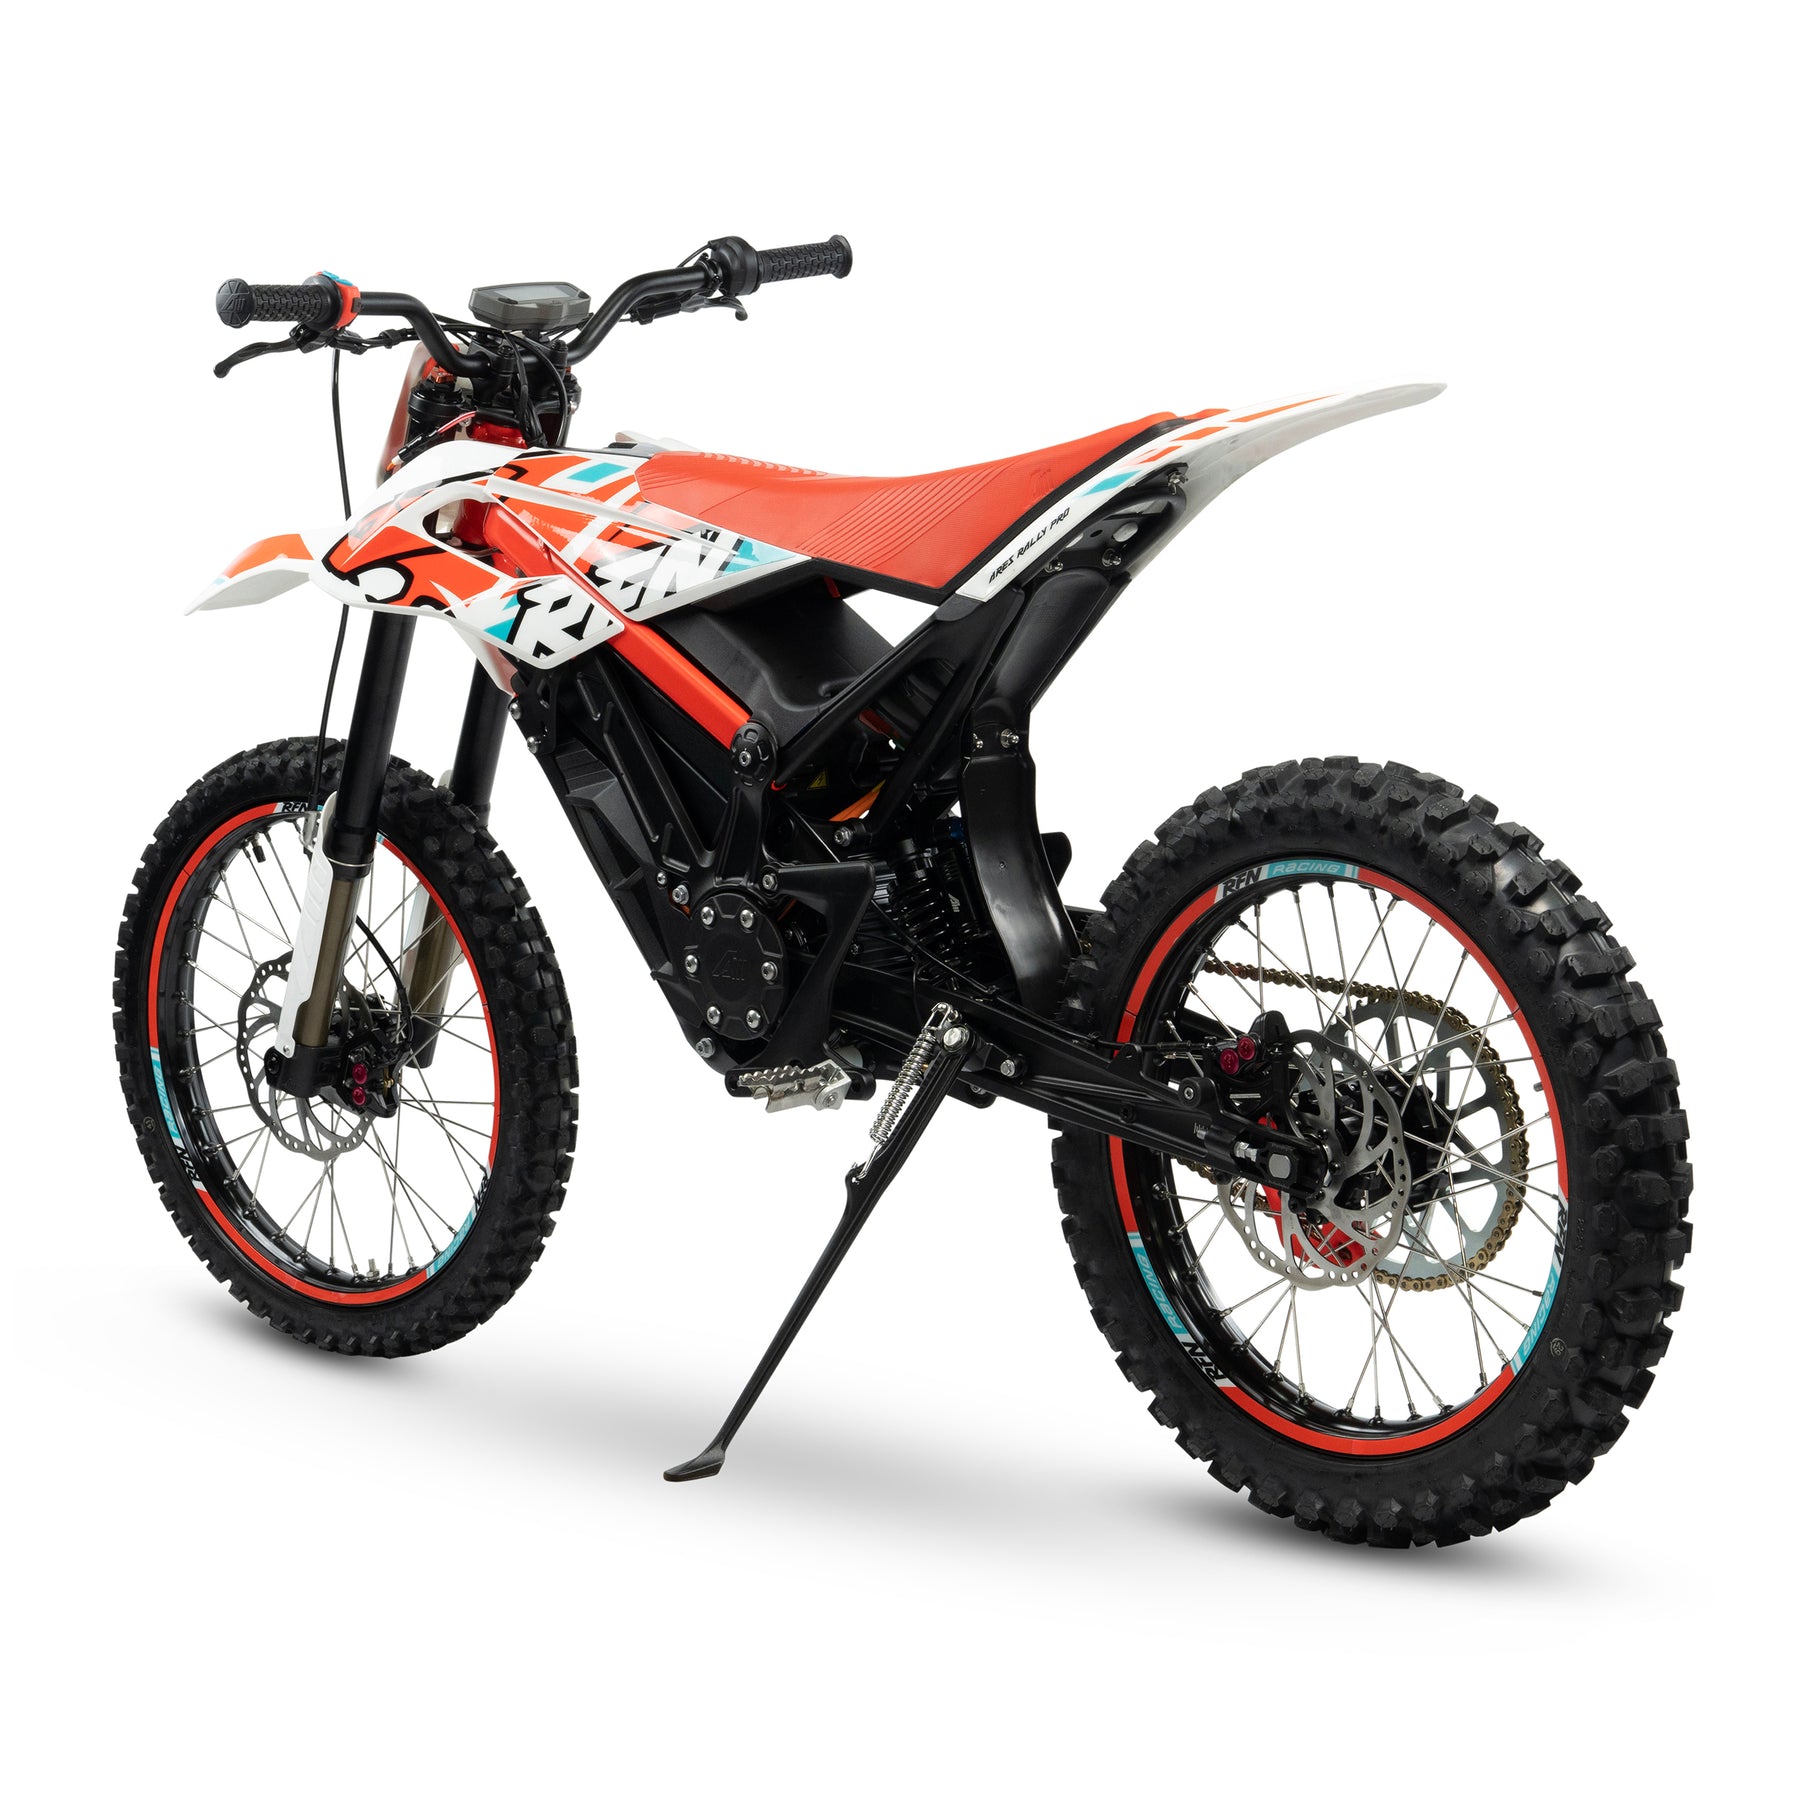 RFN ARES RALLY PRO Electric Dirt Bike – Ampd Brothers Electric